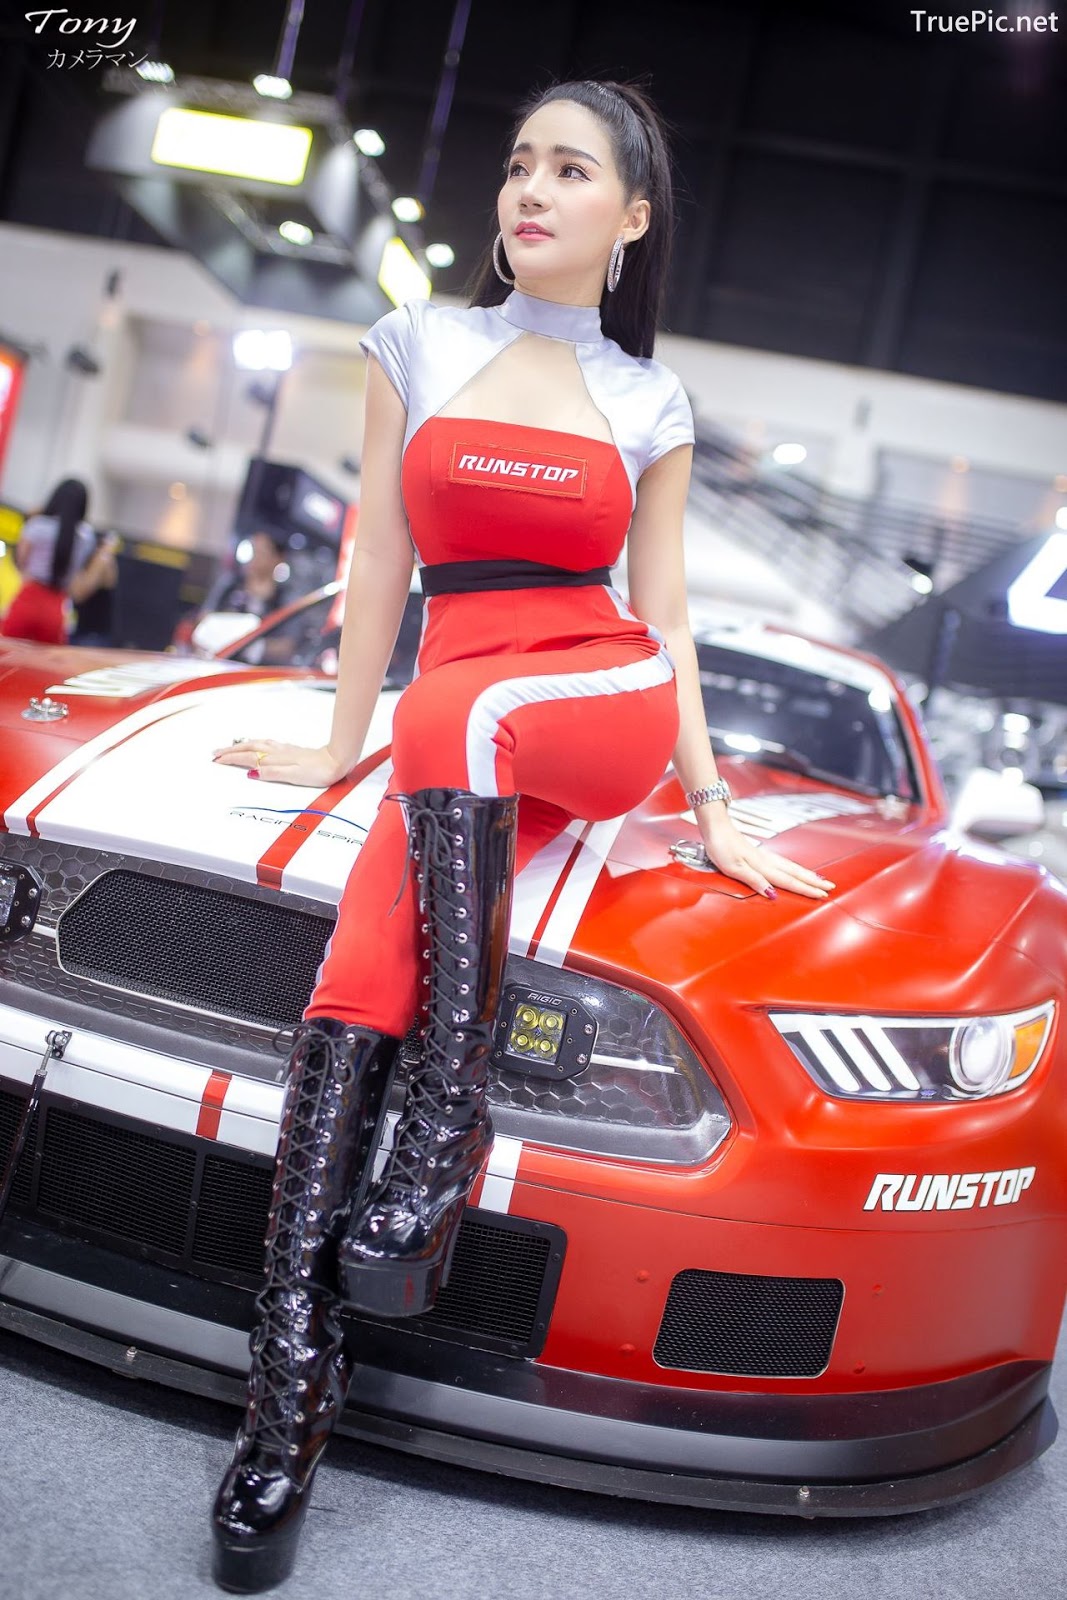 Image-Thailand-Hot-Model-Thai-Racing-Girl-At-Motor-Expo-2018-TruePic.net- Picture-78